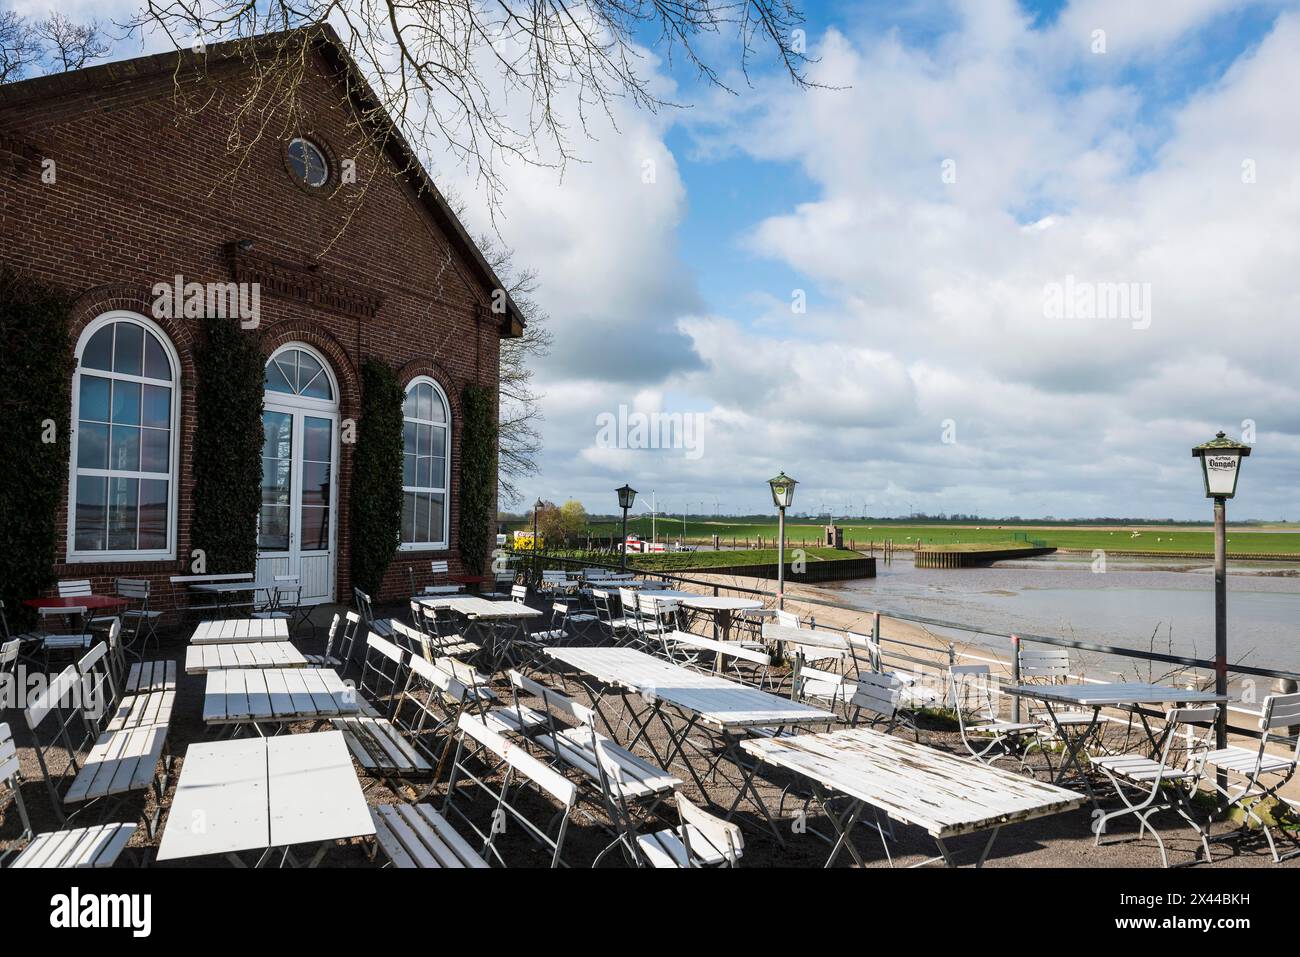 Beer garden by the sea, Altes spa hotel, Dangast, Jade Bay, North Sea, Lower Saxony, Germany Stock Photo